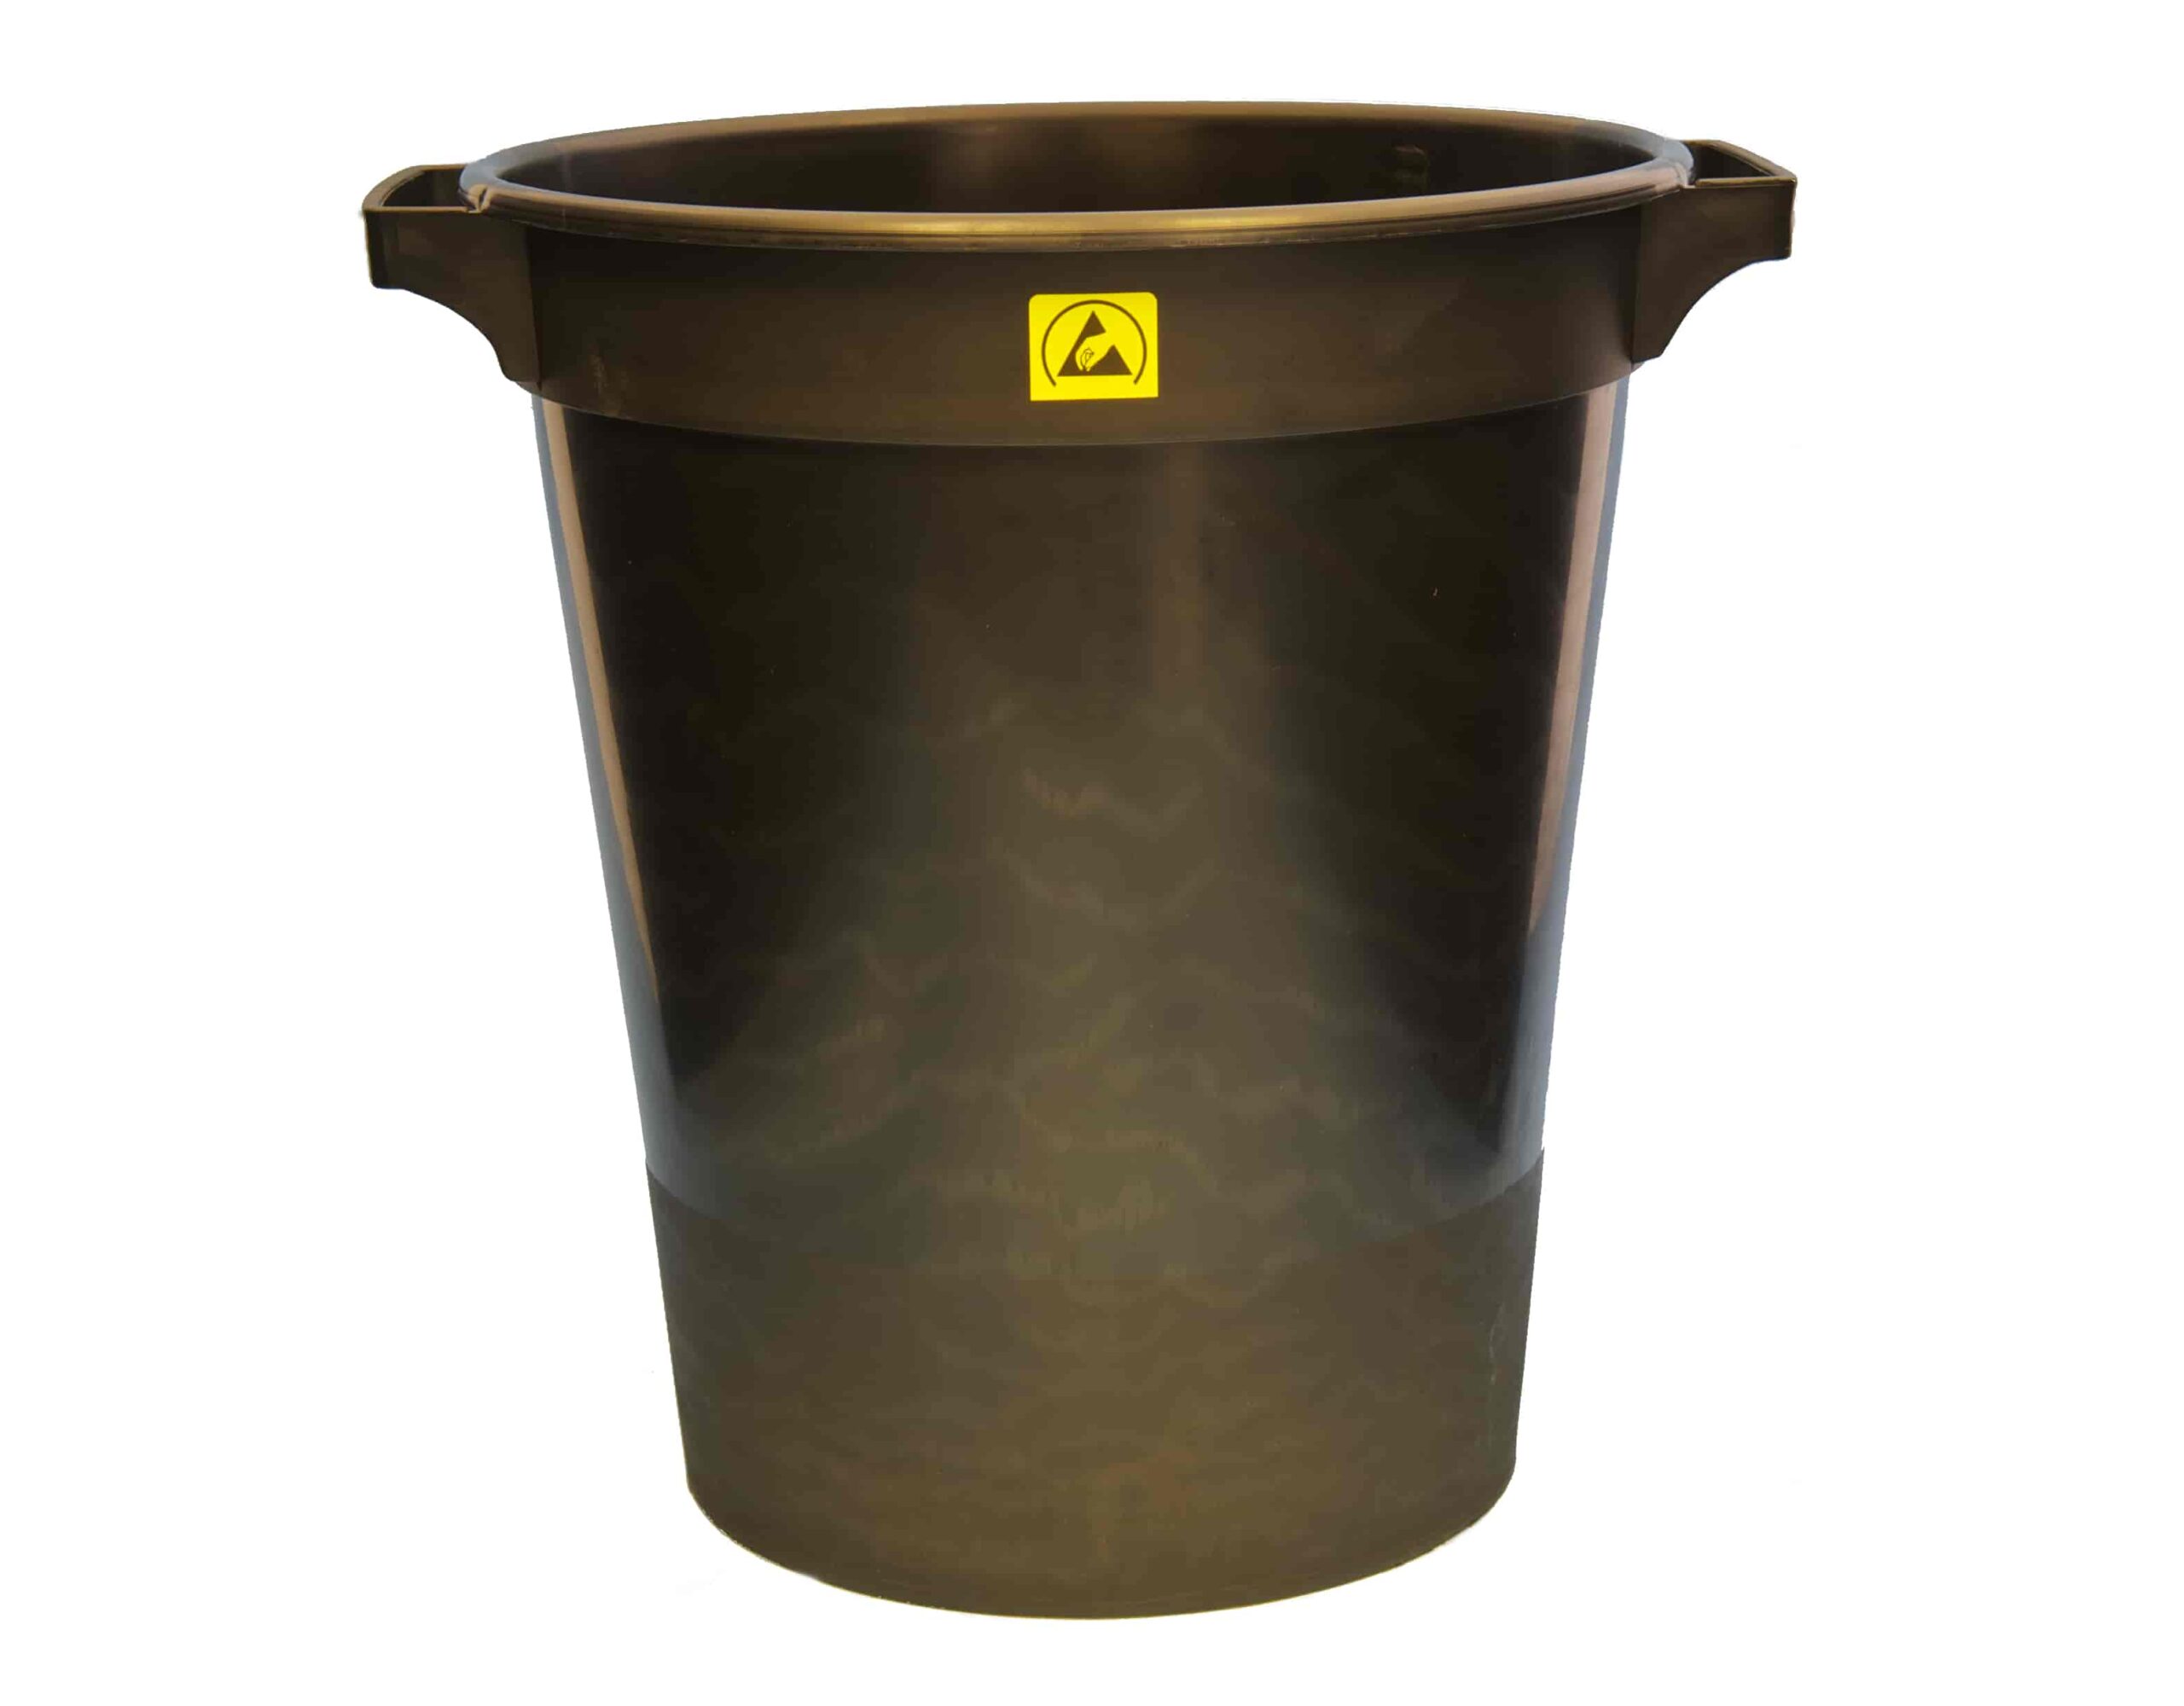 Conductive Waste Bins and liners